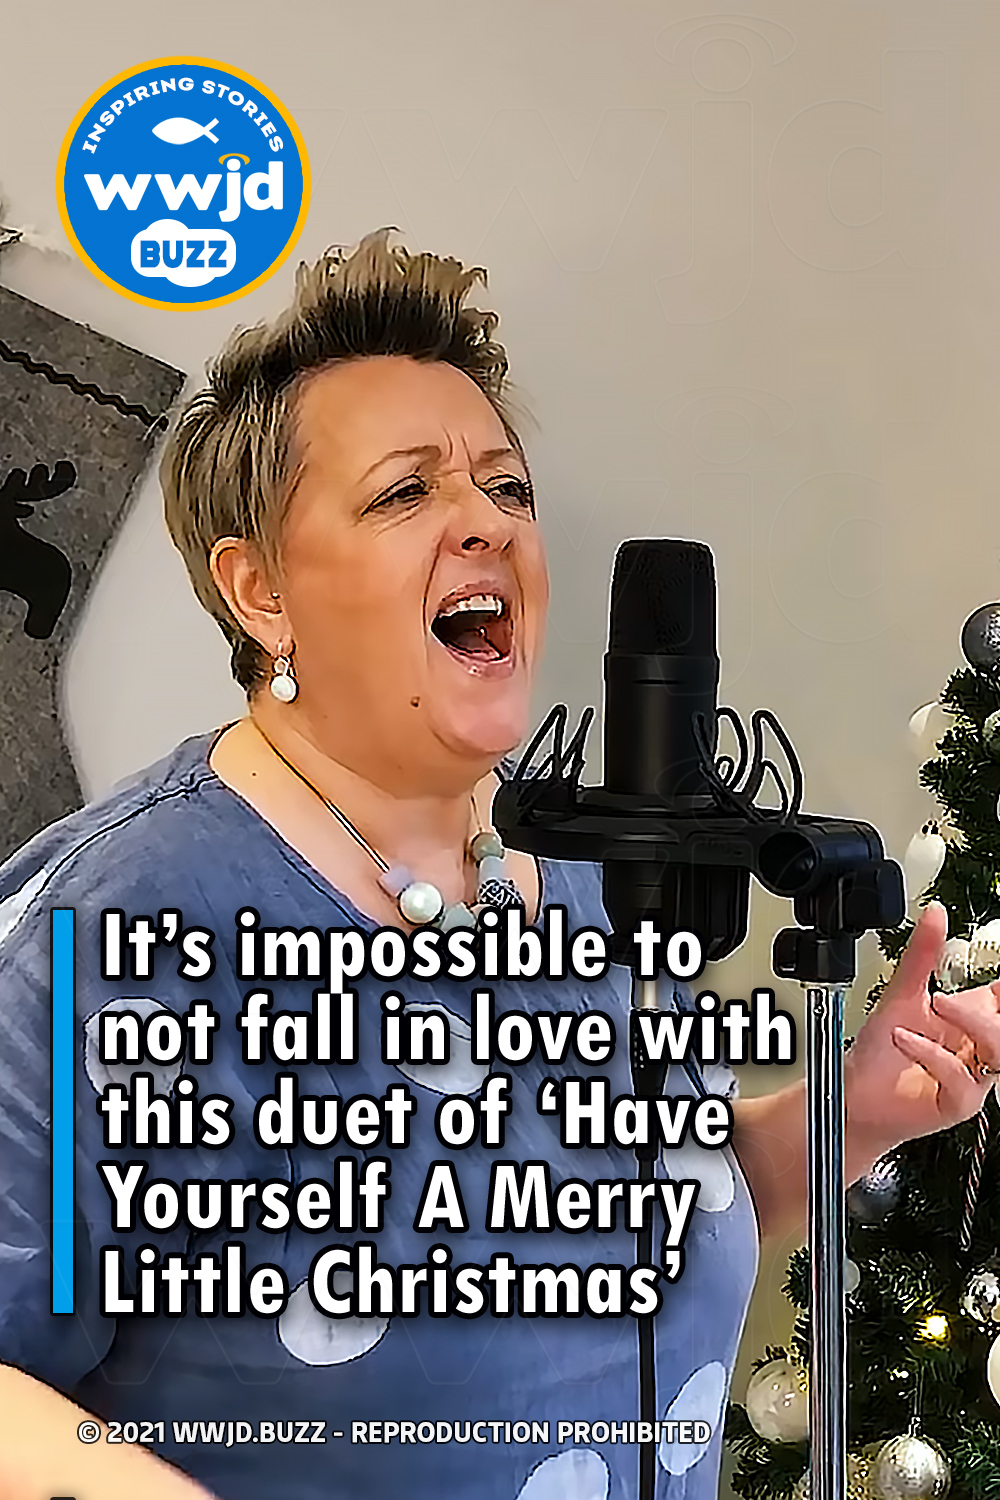 It’s impossible to not fall in love with this duet of ‘Have Yourself A Merry Little Christmas’